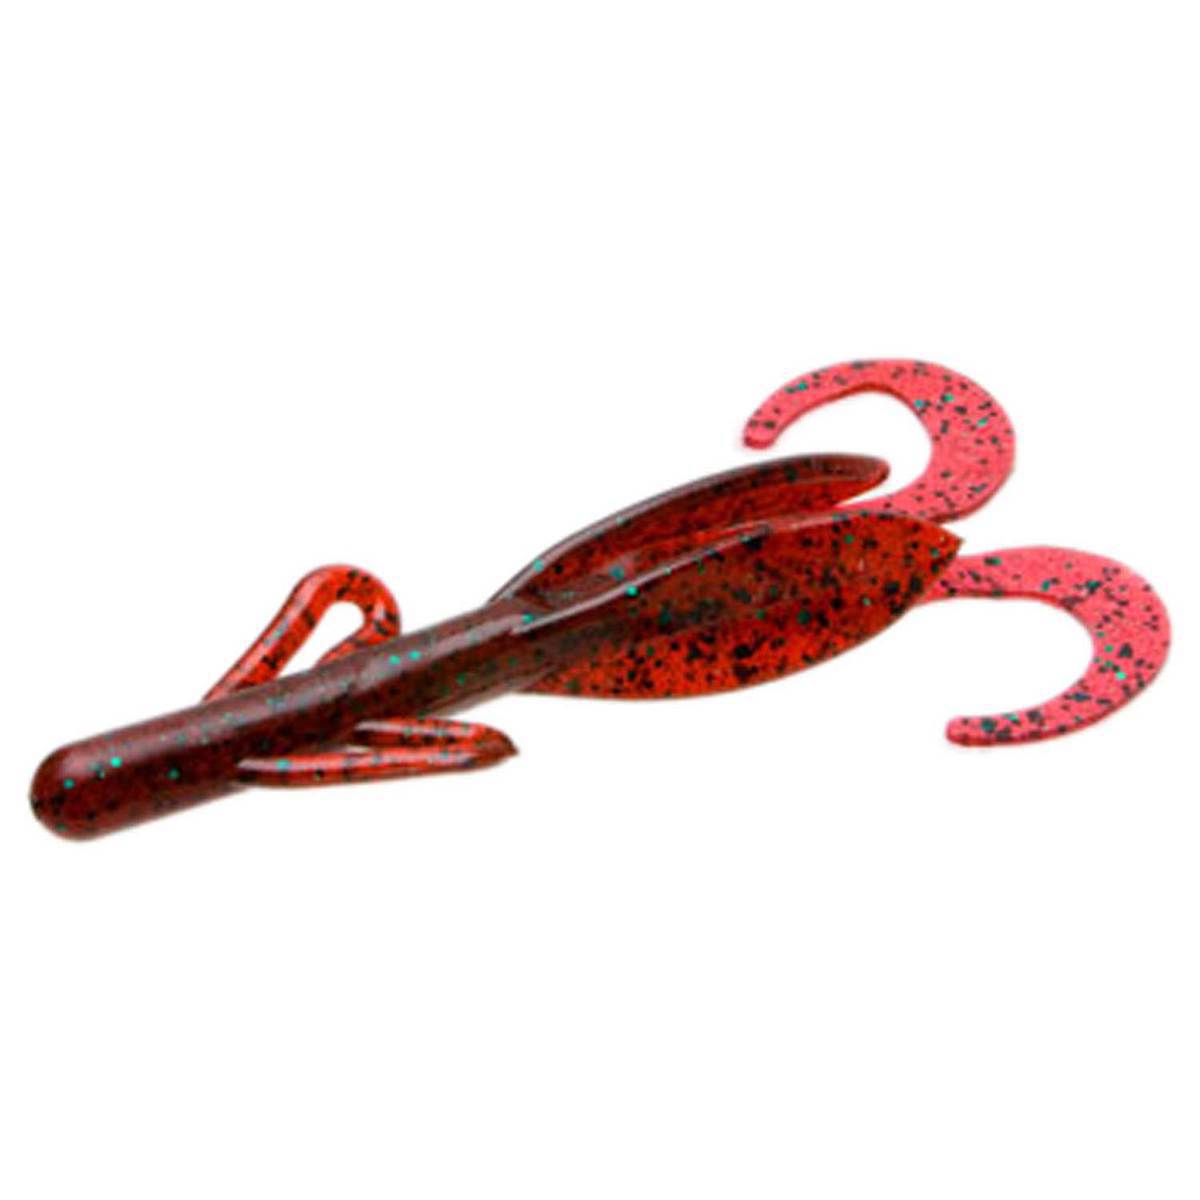 Zoom Brush Hog Creature Bait - Red Bug, 6in - Red Bug | Sportsman's Warehouse